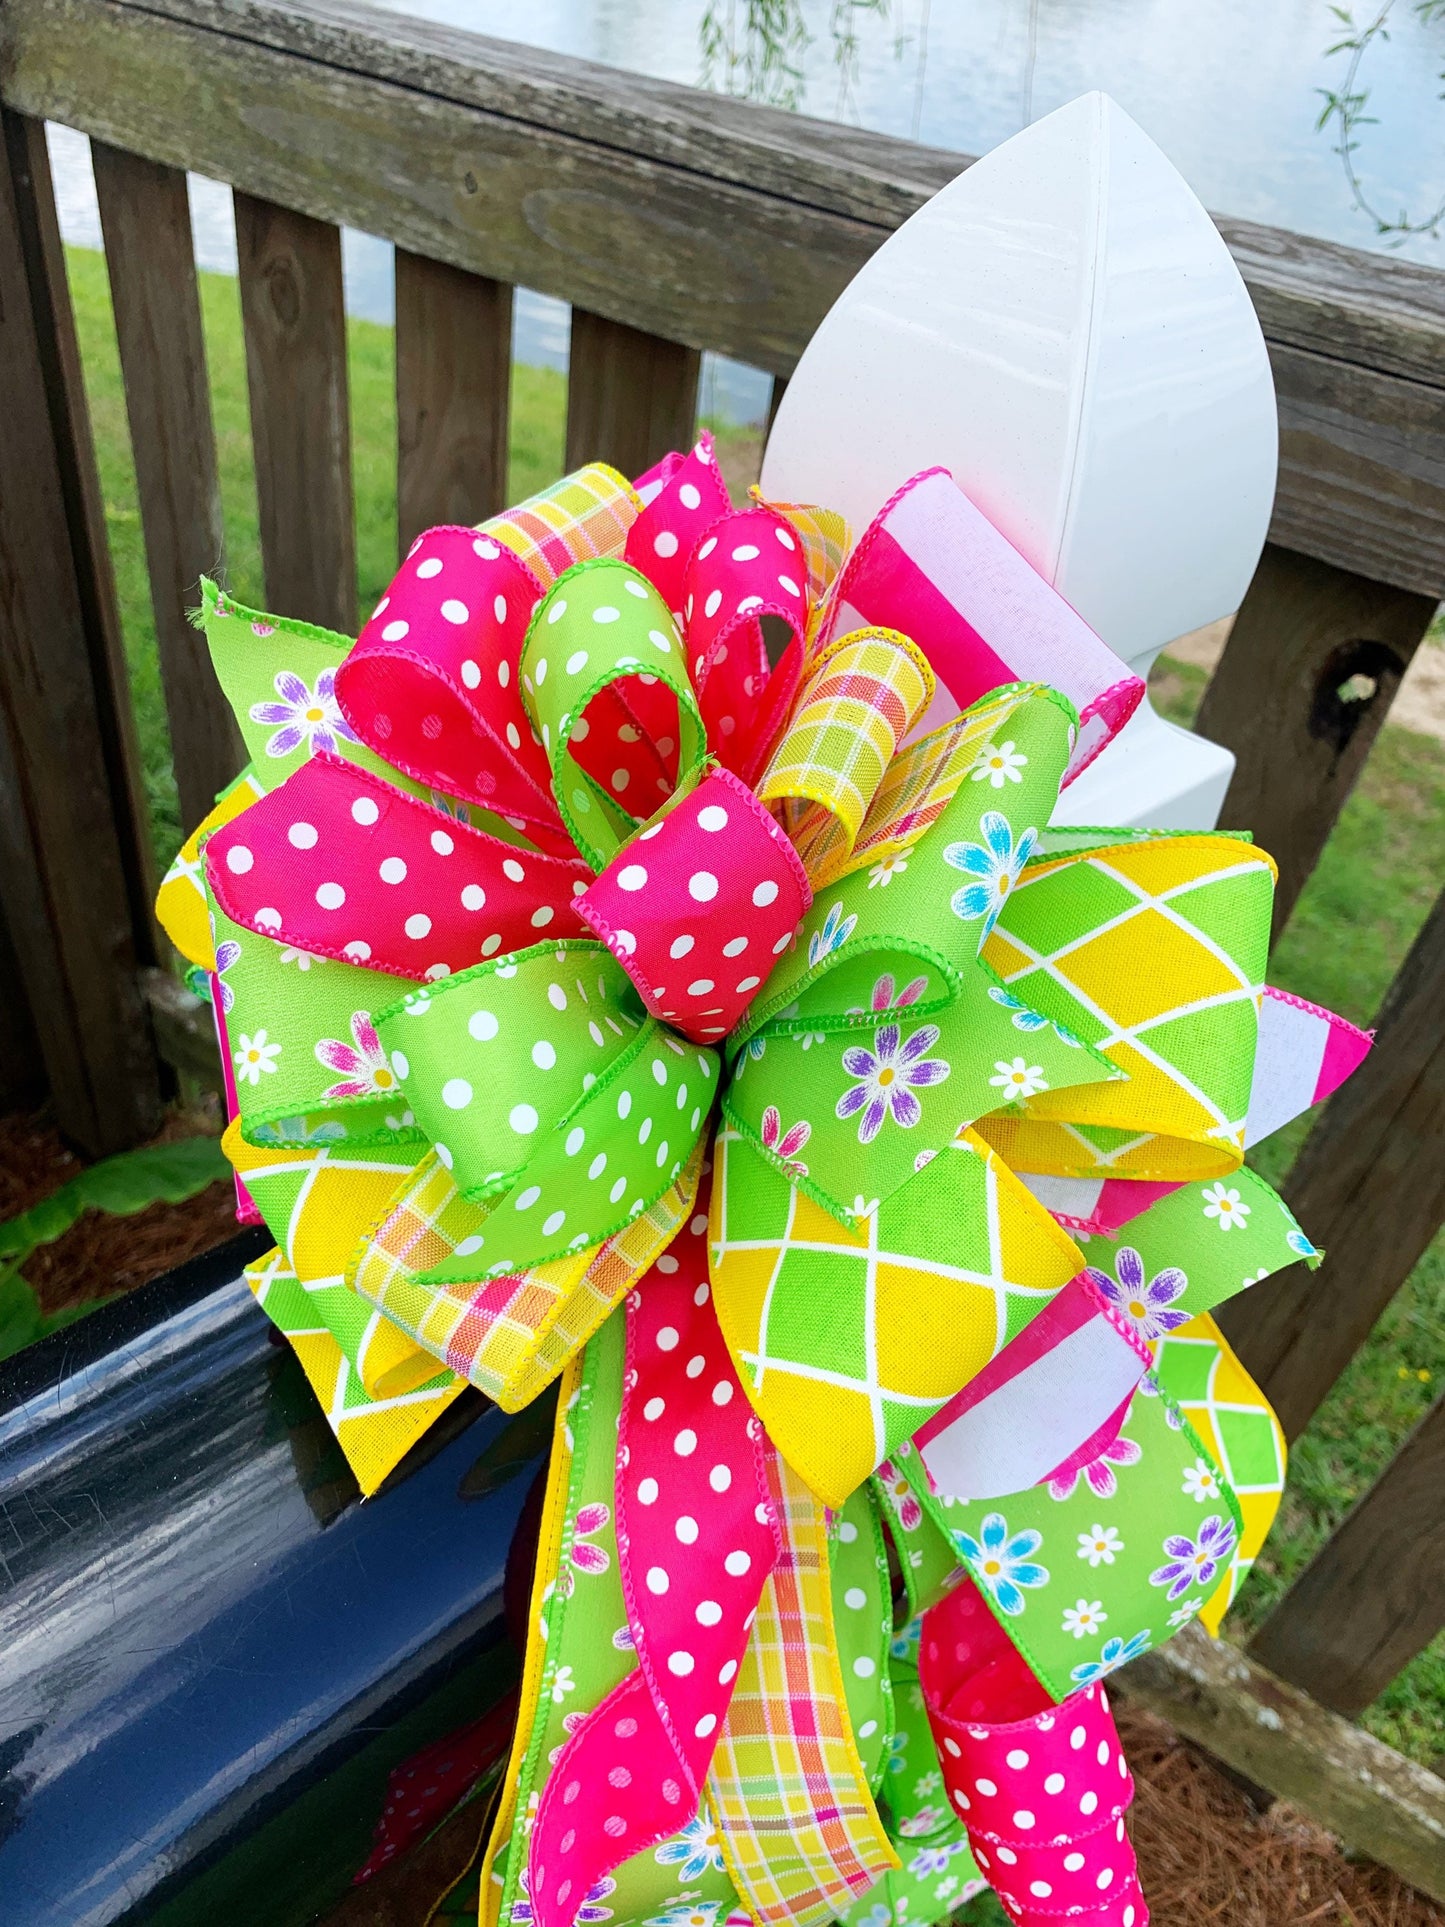 Everyday Collection - Flowers,Flower Ribbon, Floral Bow,Wreath Bow,Mailbox Bow,Gift, Gifts,Ribbon,Summer Bow,Polka Dots,Polka Dot Ribbon